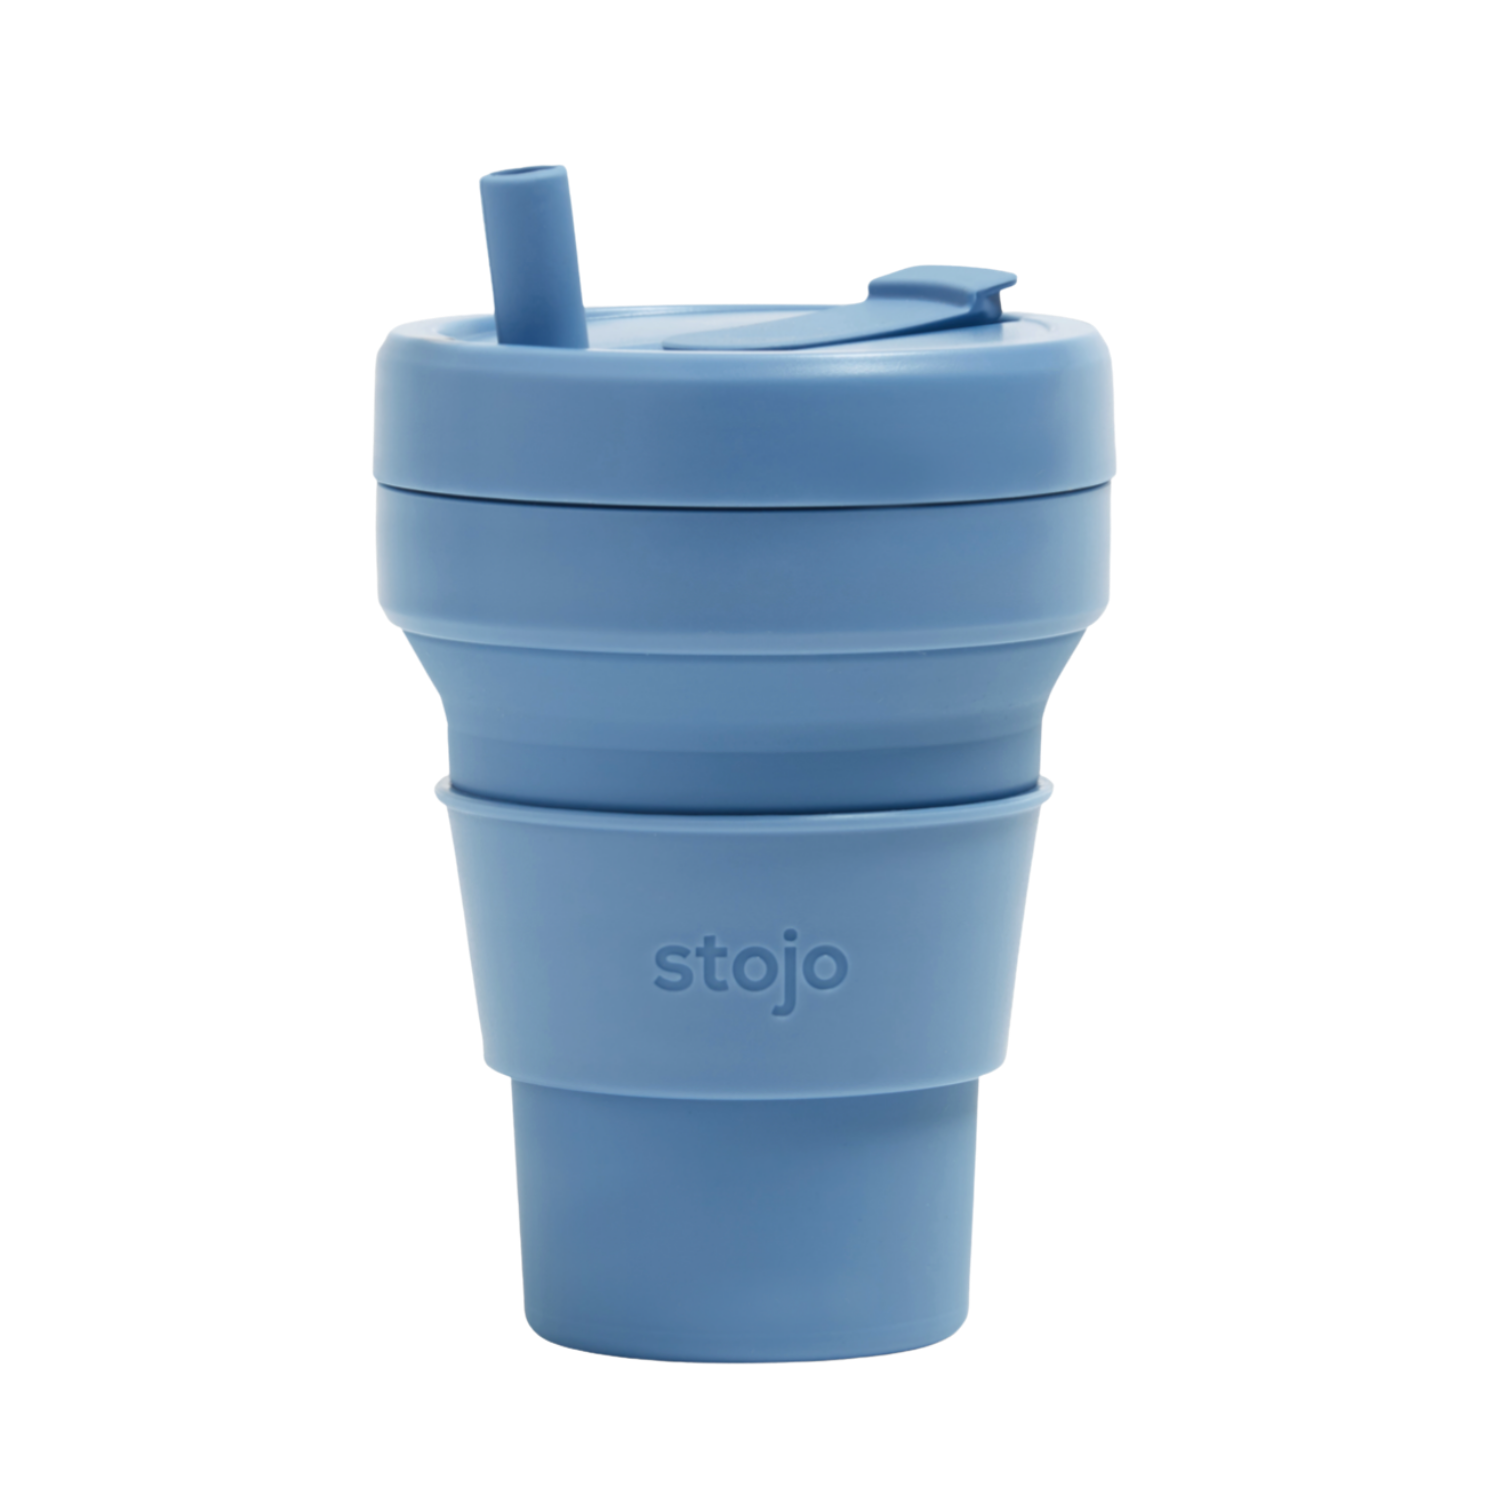 Stojo 16oz Collapsible Cup - Steel